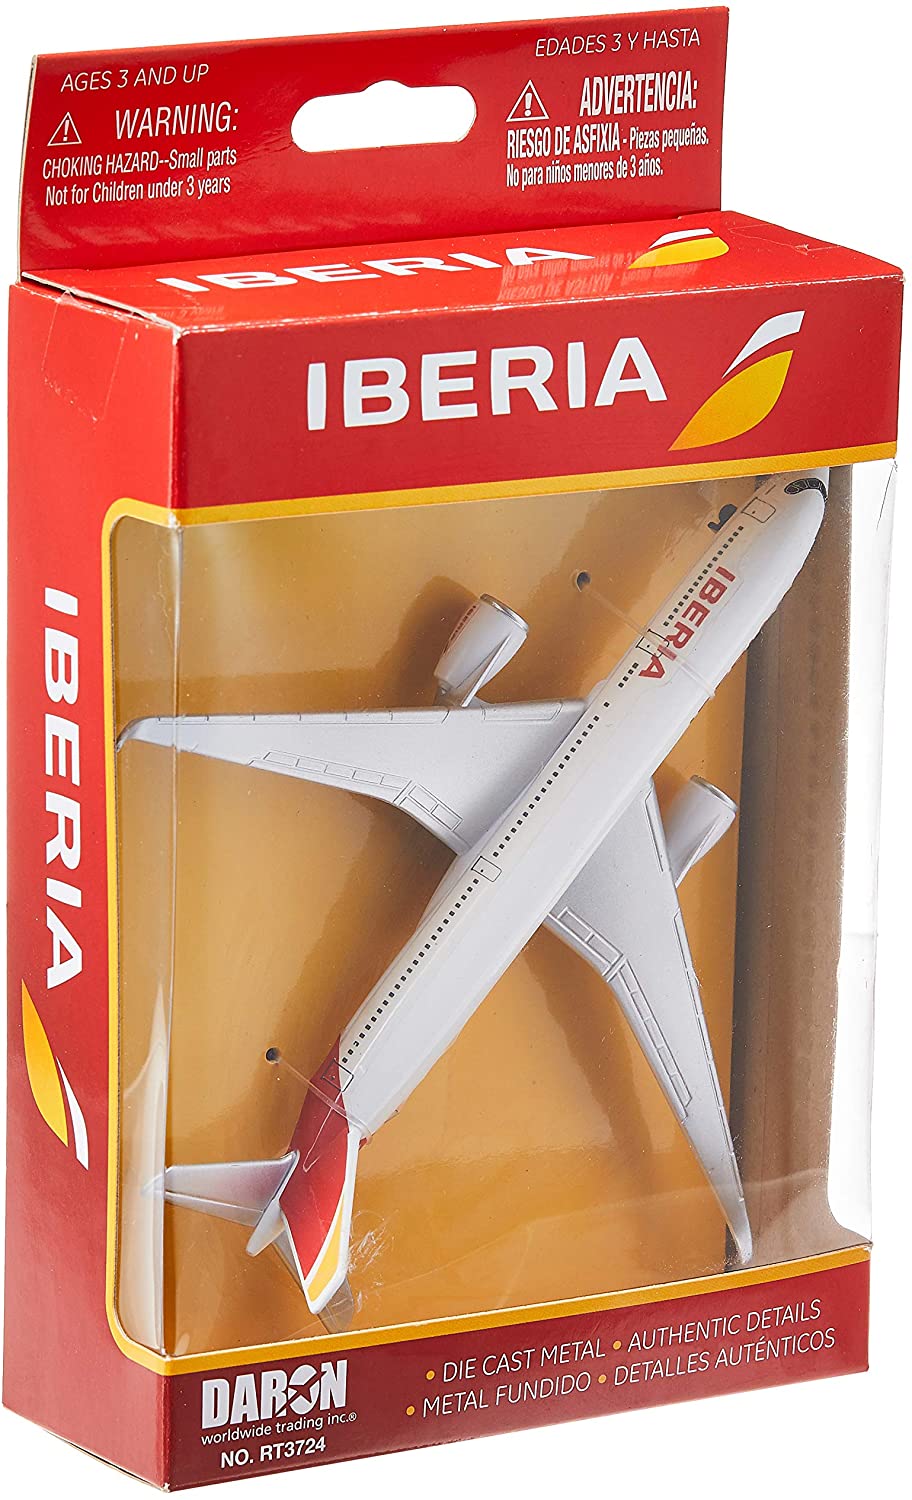 Iberia Airlines Airliner Toy Airplane Diecast with Plastic Parts 